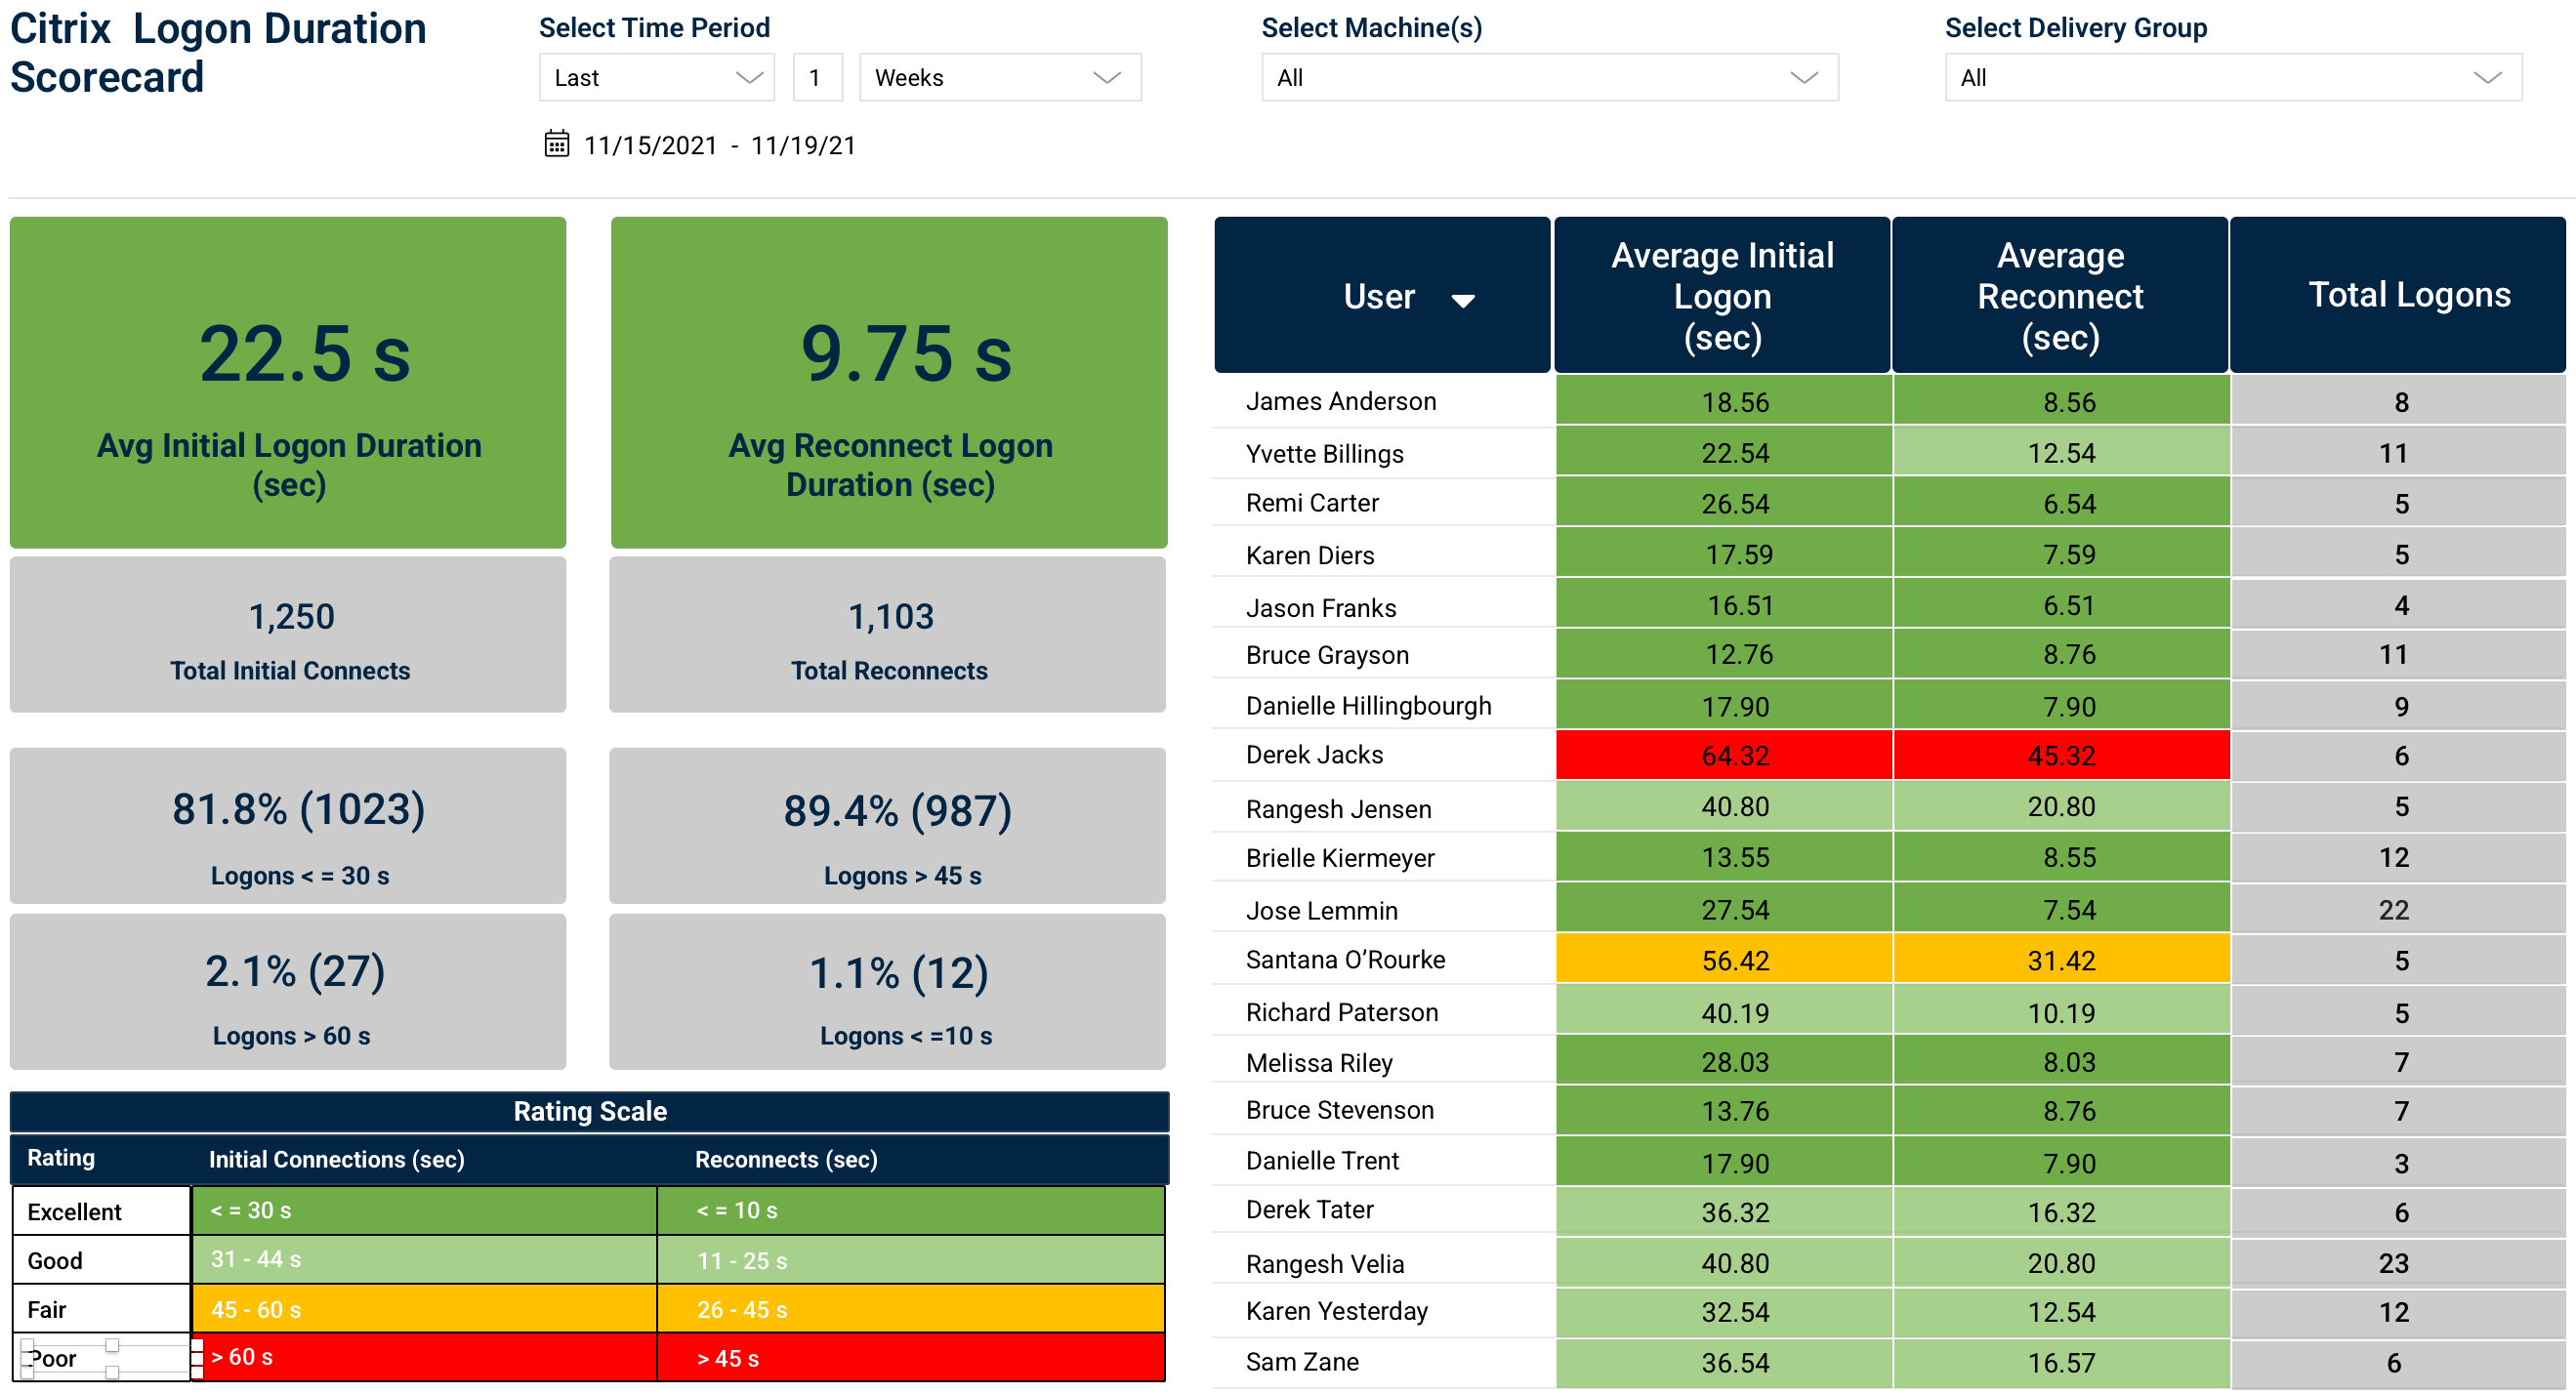 The Logon Duration Scorecard provides a holistic view of Citrix logon times and experience across the organization, and automatically compares performance against industry best practices.